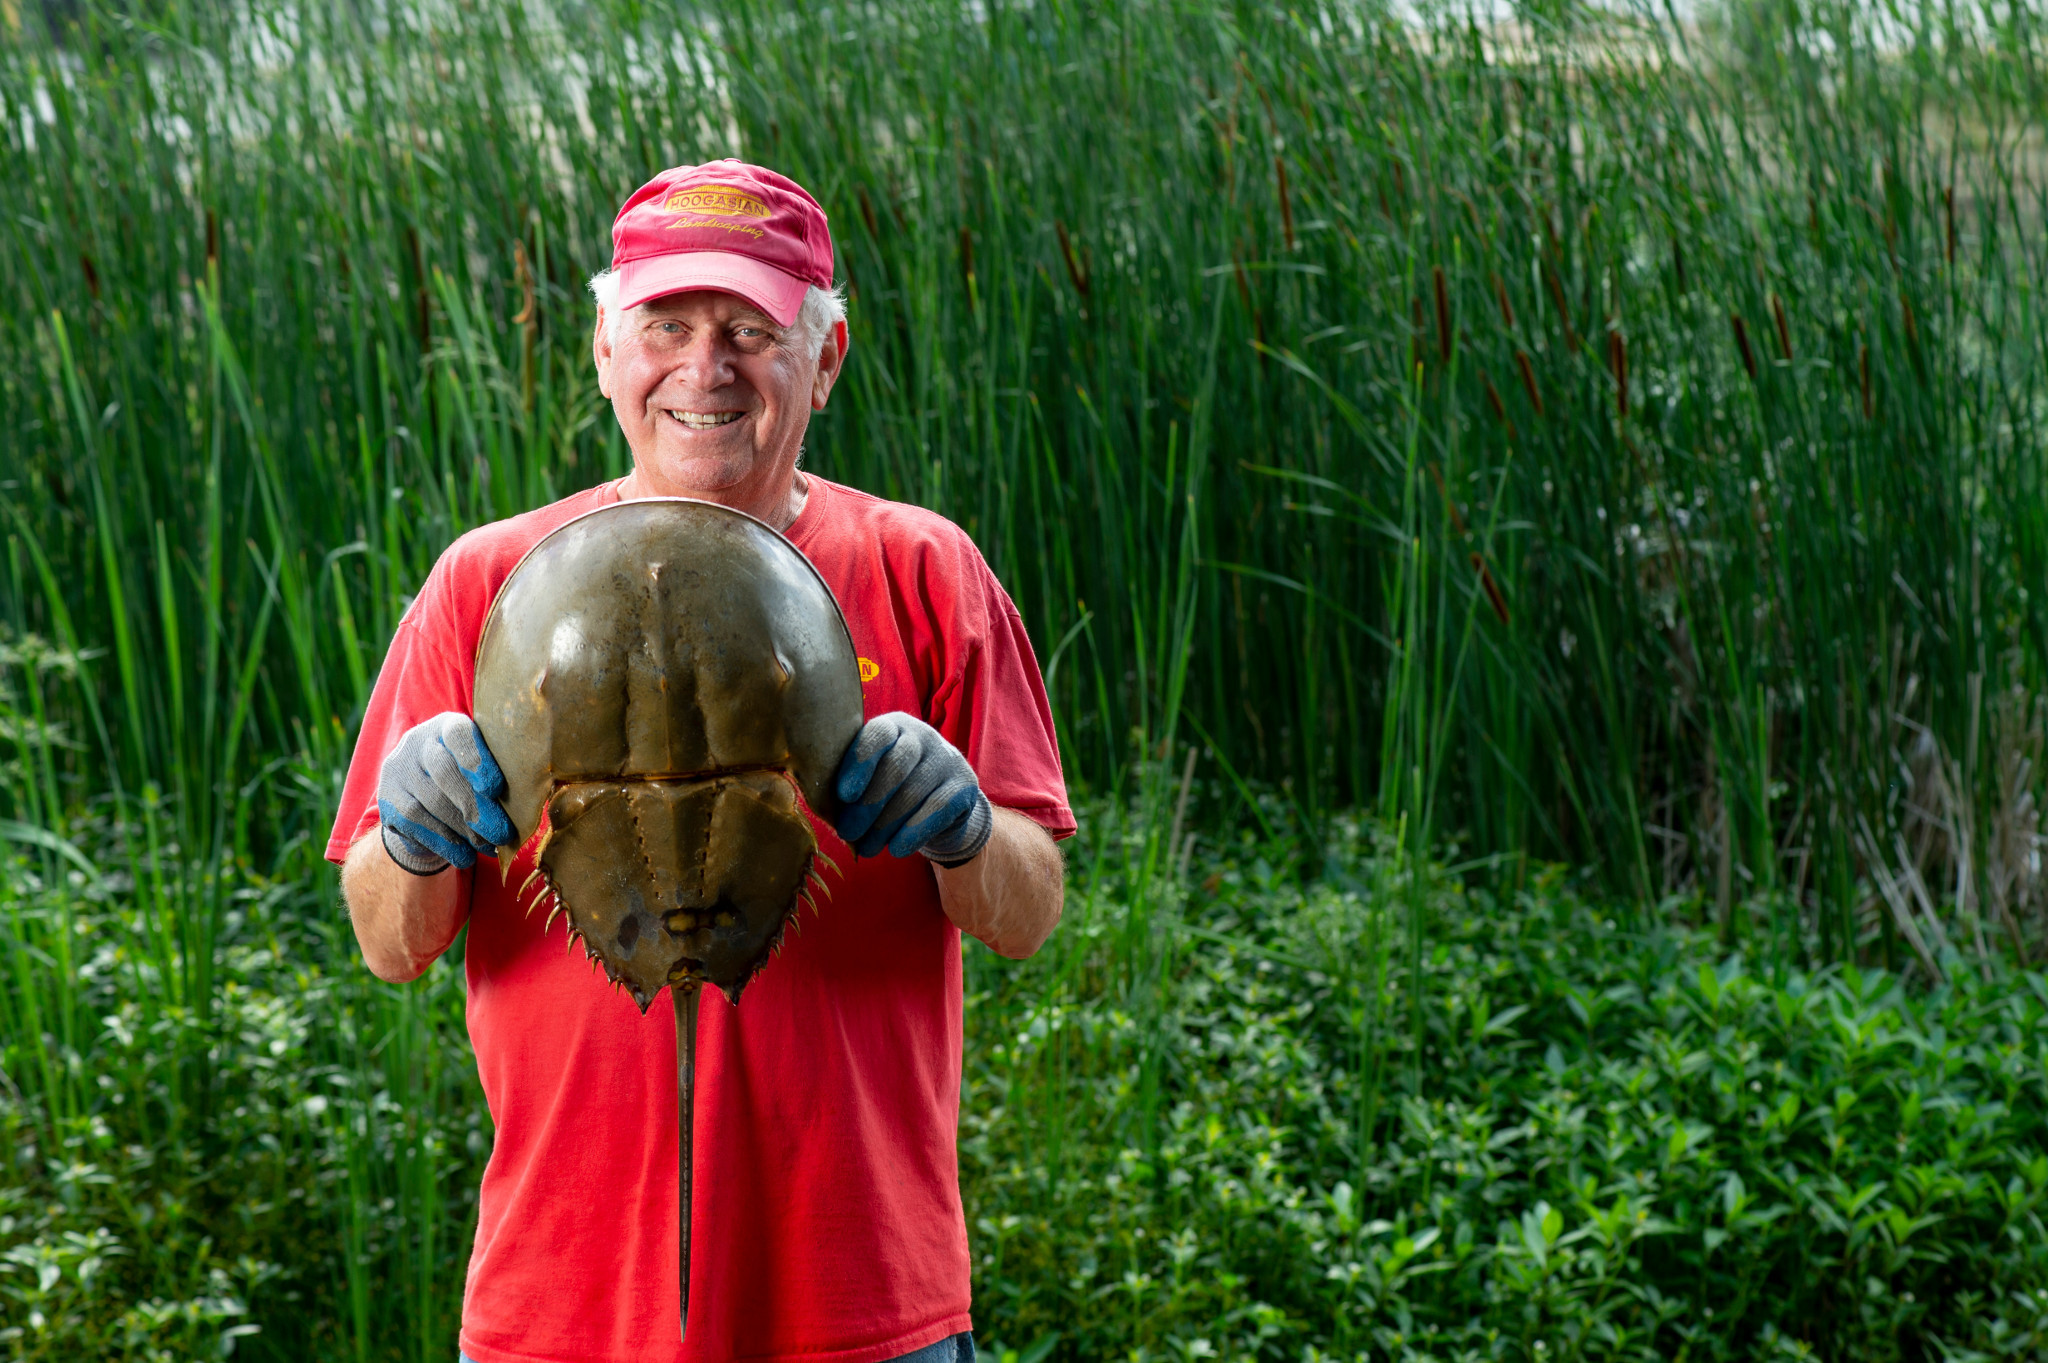 Supporting PSCI Initiatives for Sustainably Sourcing Horseshoe Crabs